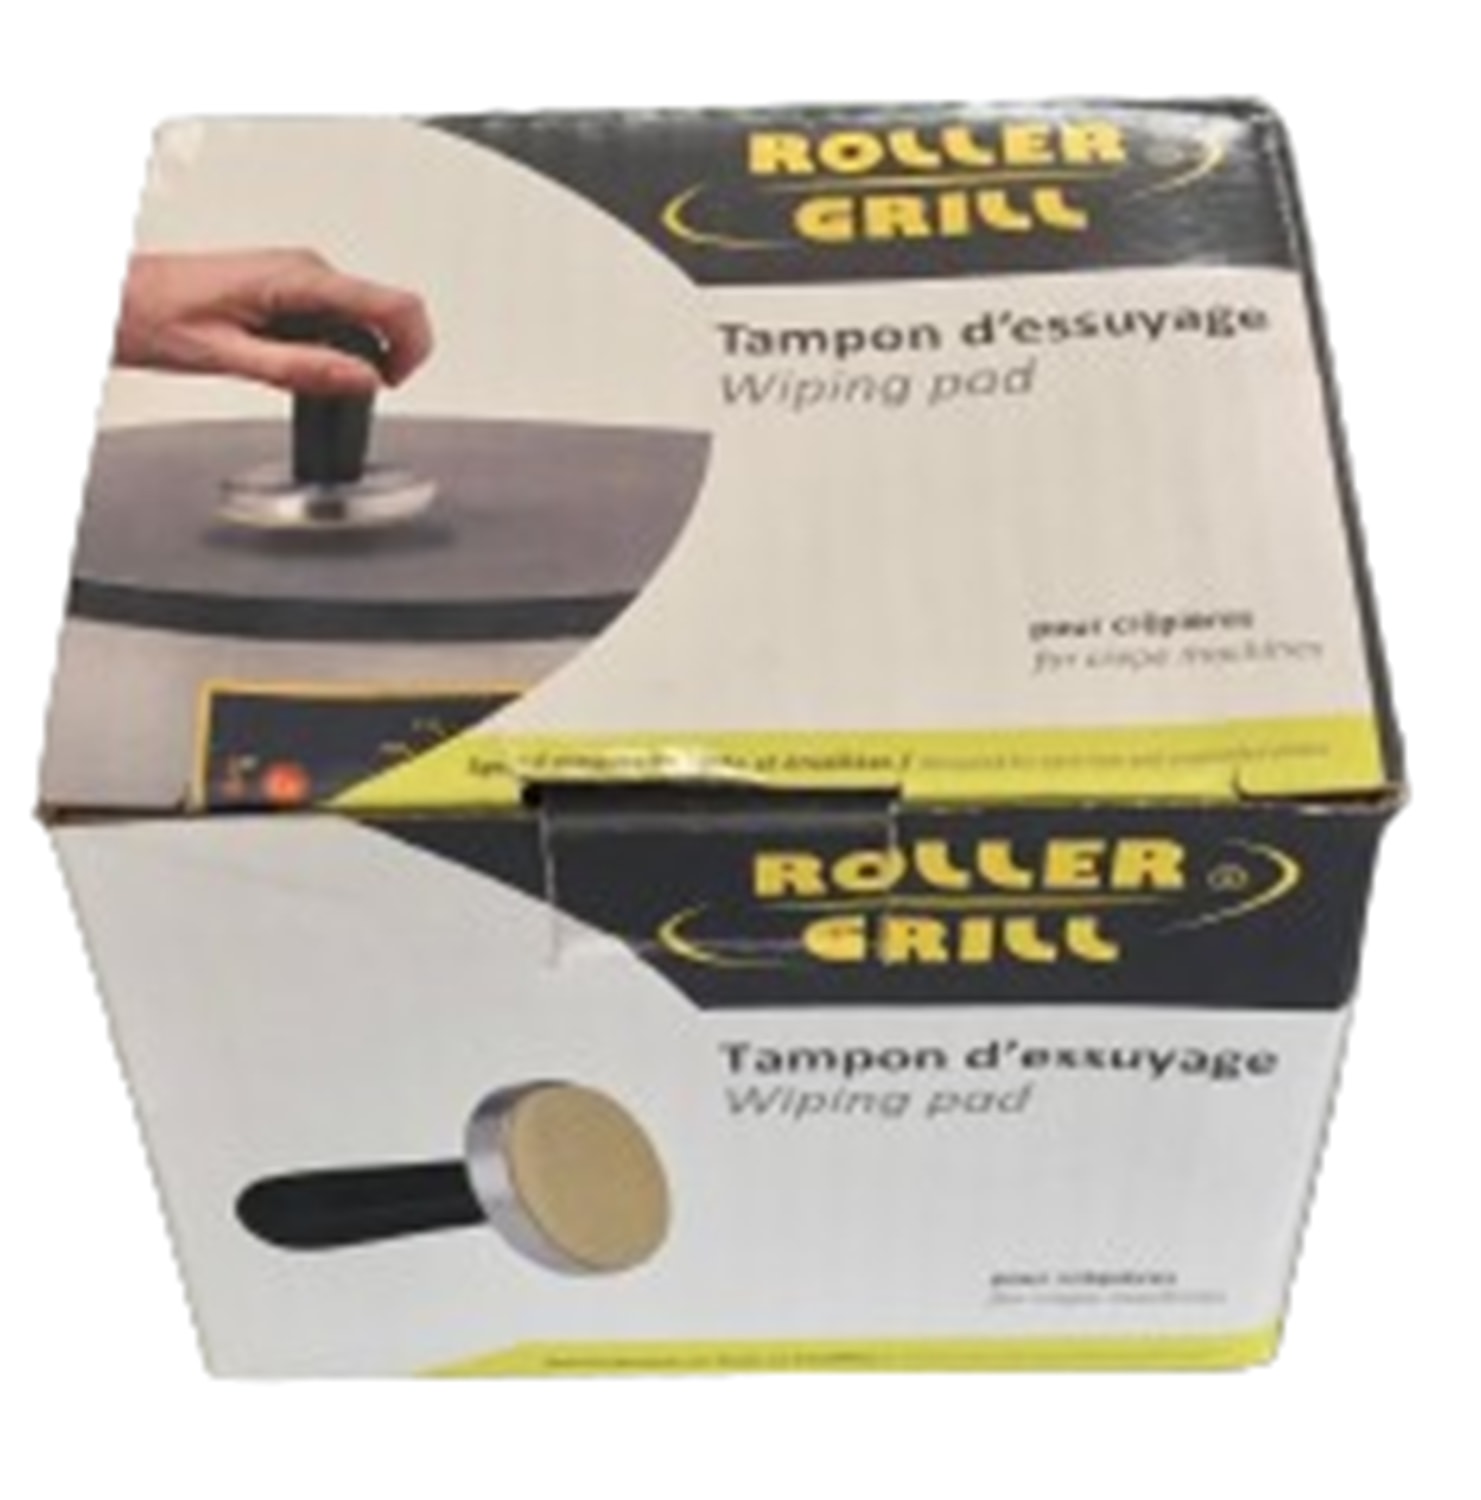 ROLLER GRILL Tampon d'essuyage  - F07049